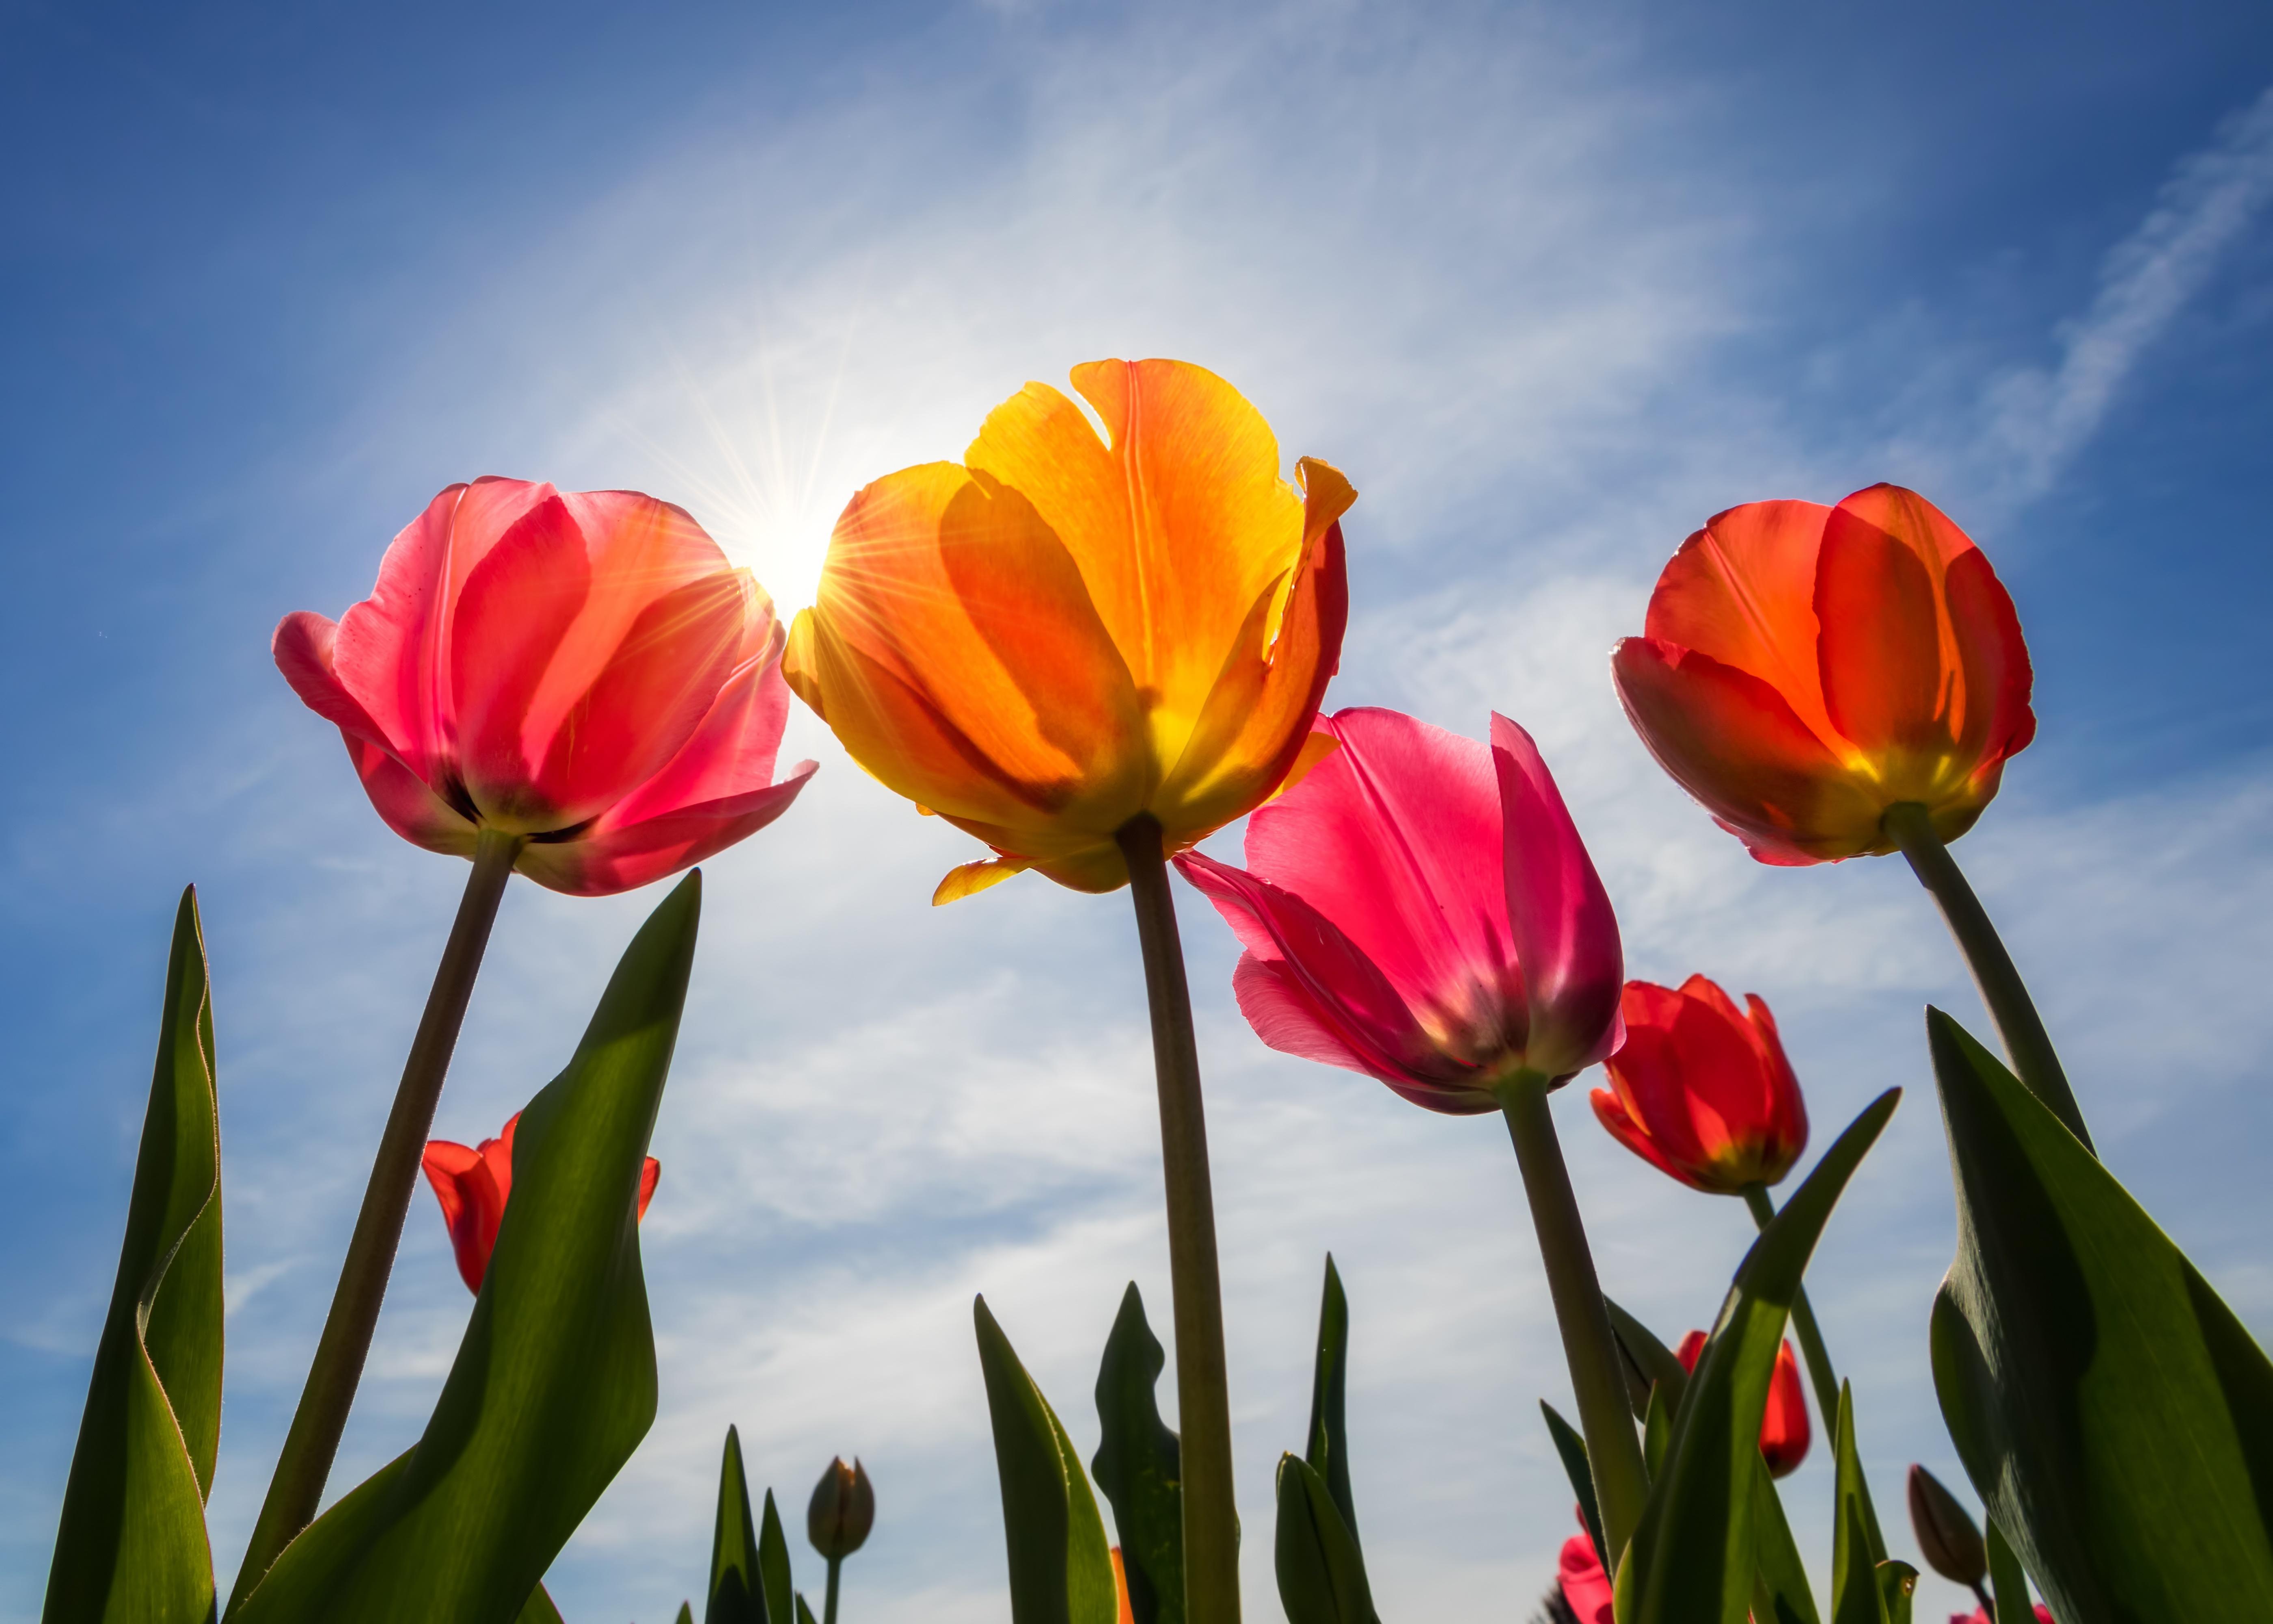 #Bloom, #Spring, #Sunny day, #Tulips, K. Flowers